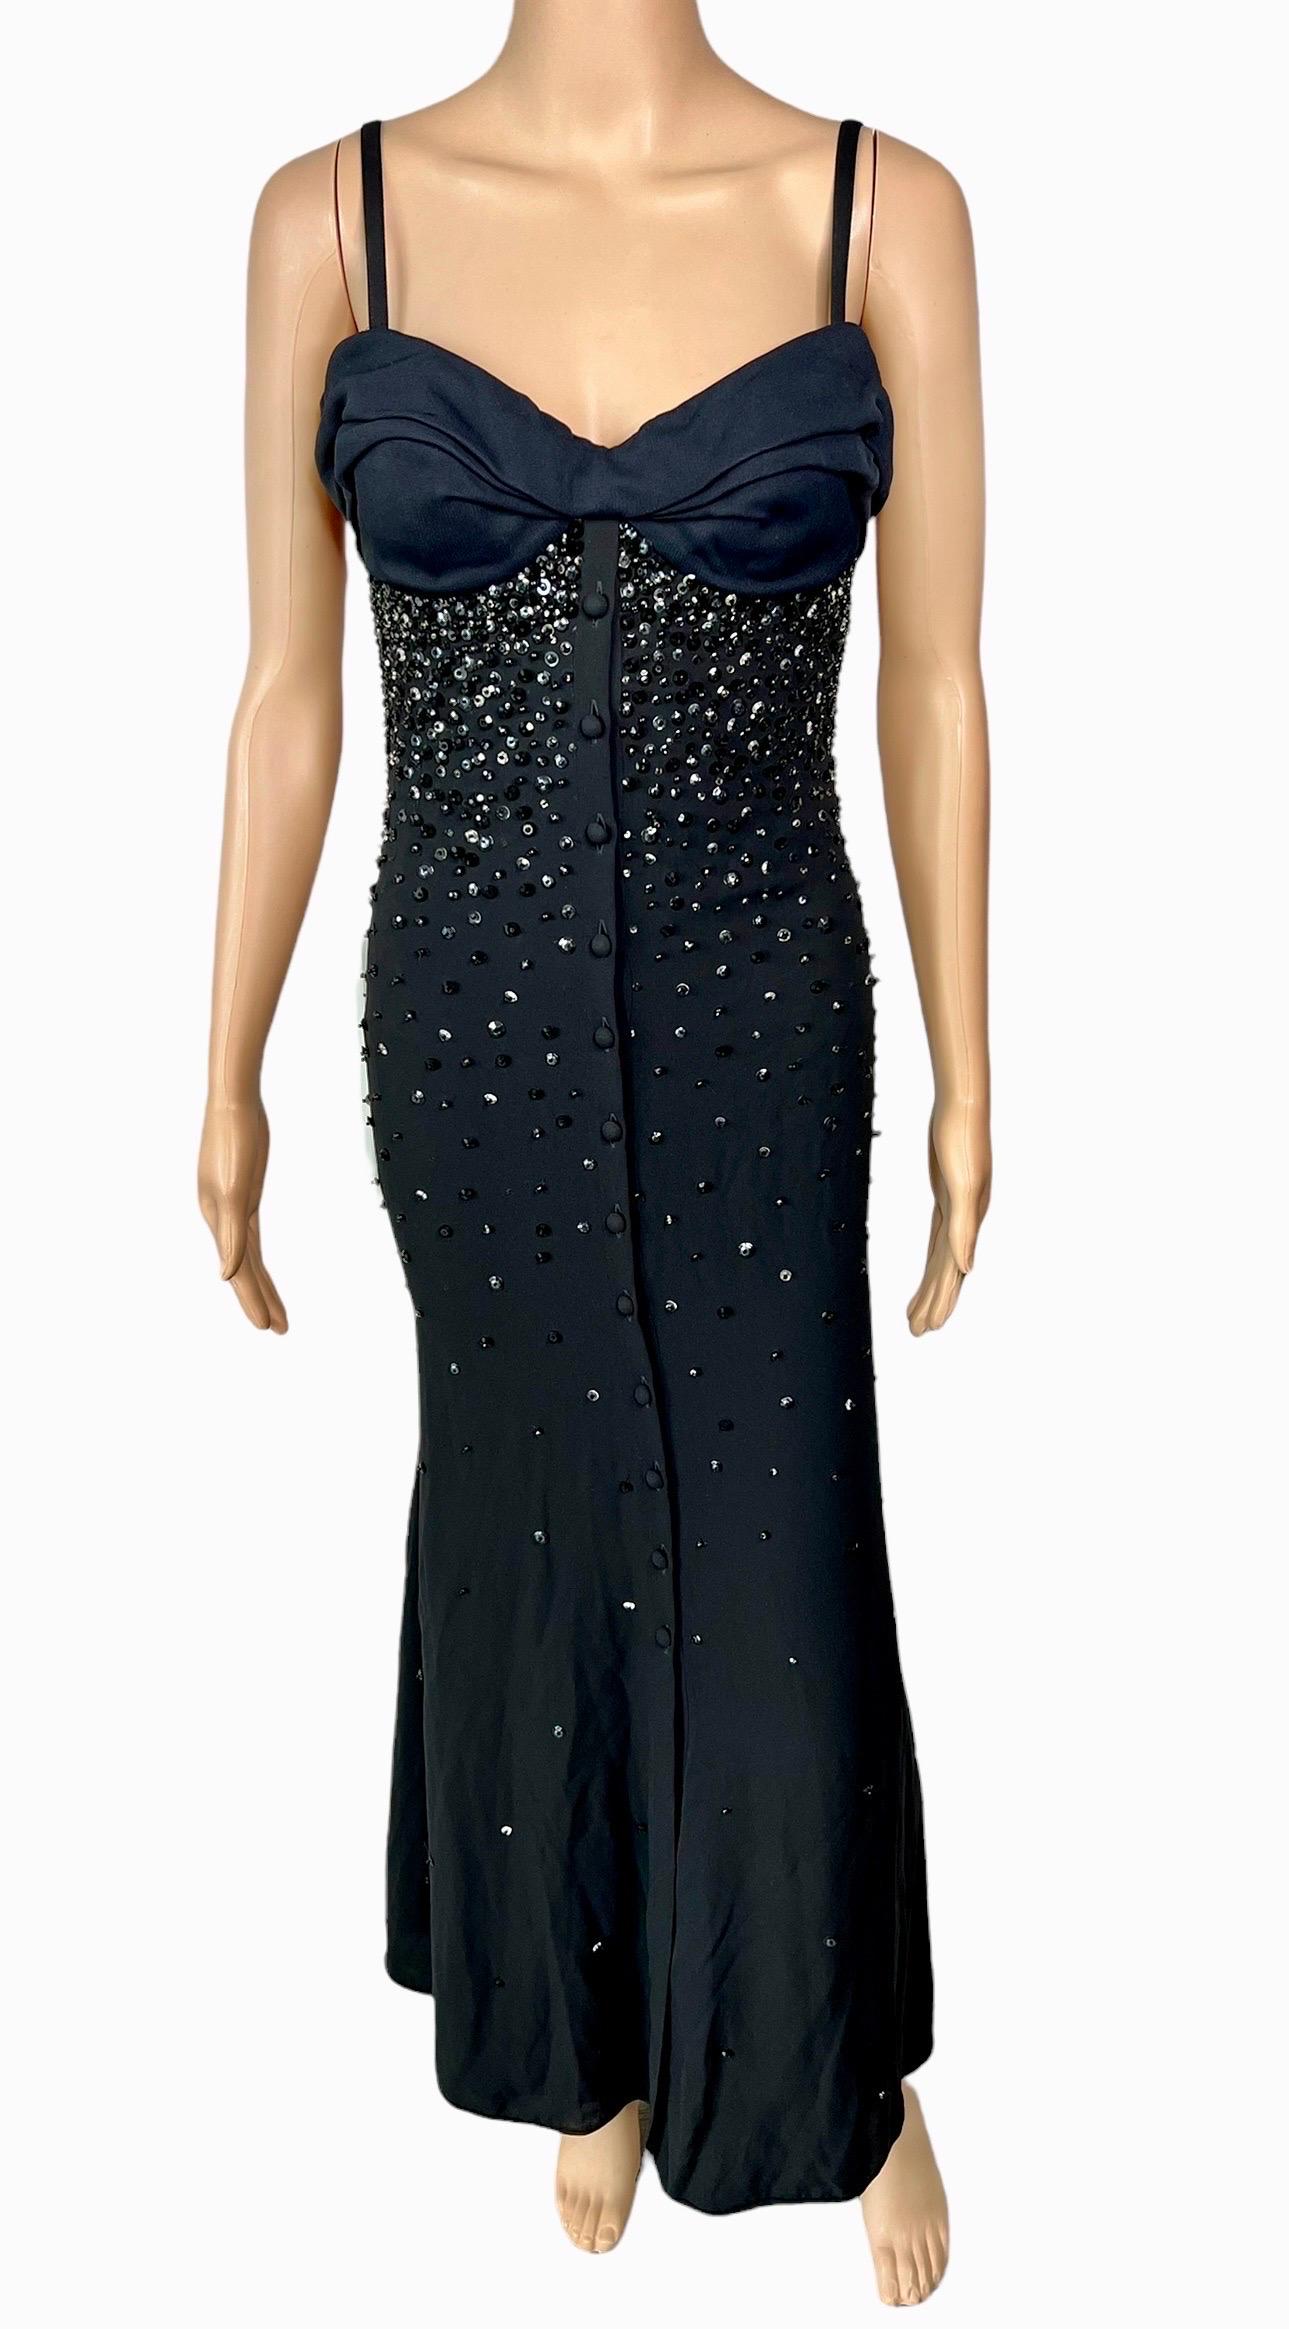 Gianni Versace S/S 1996 Runway Embellished Bustier Black Evening Dress Gown  For Sale 4